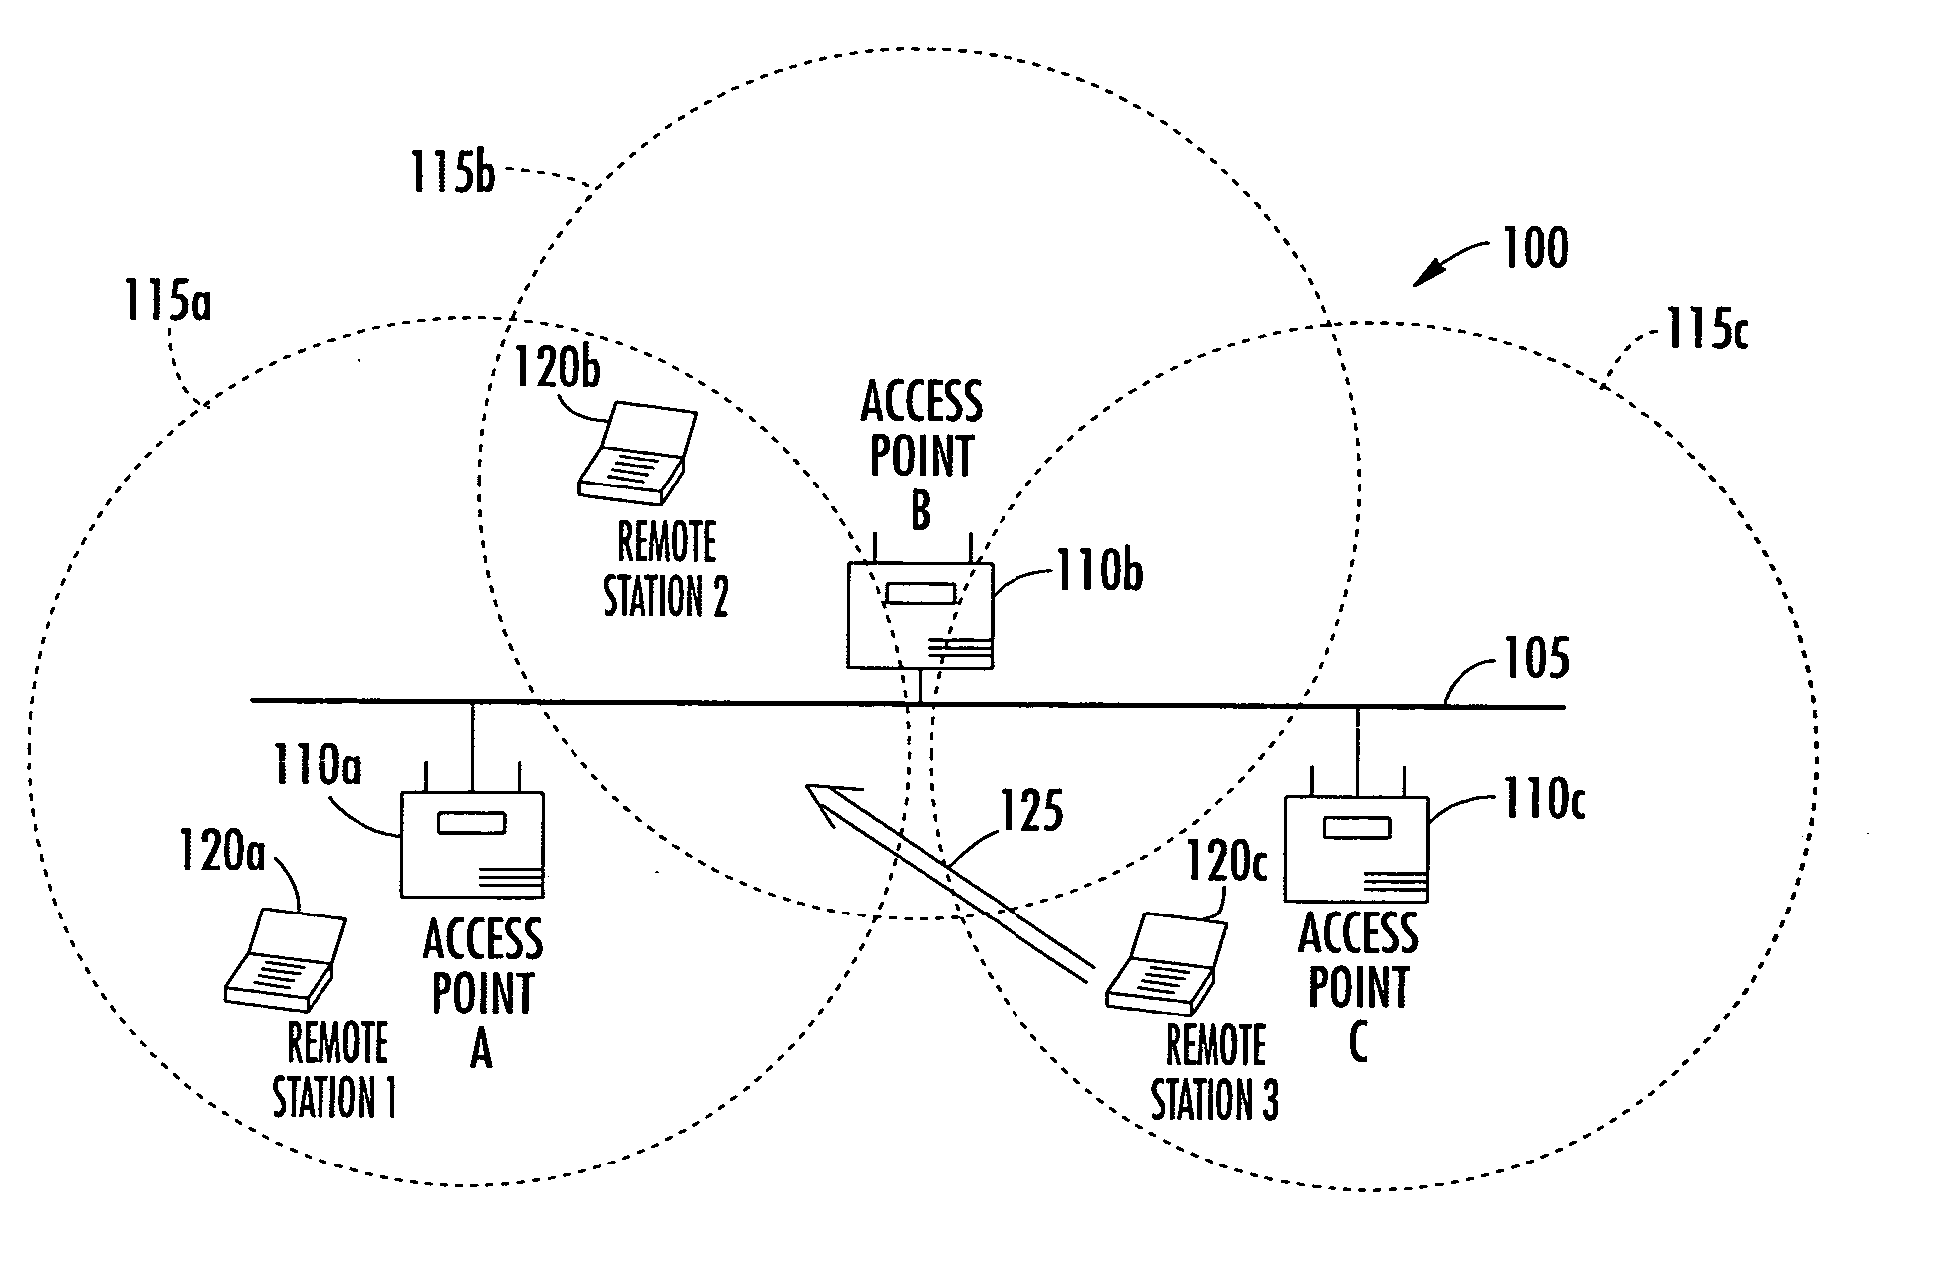 Antenna steering for an access point based upon spatial diversity